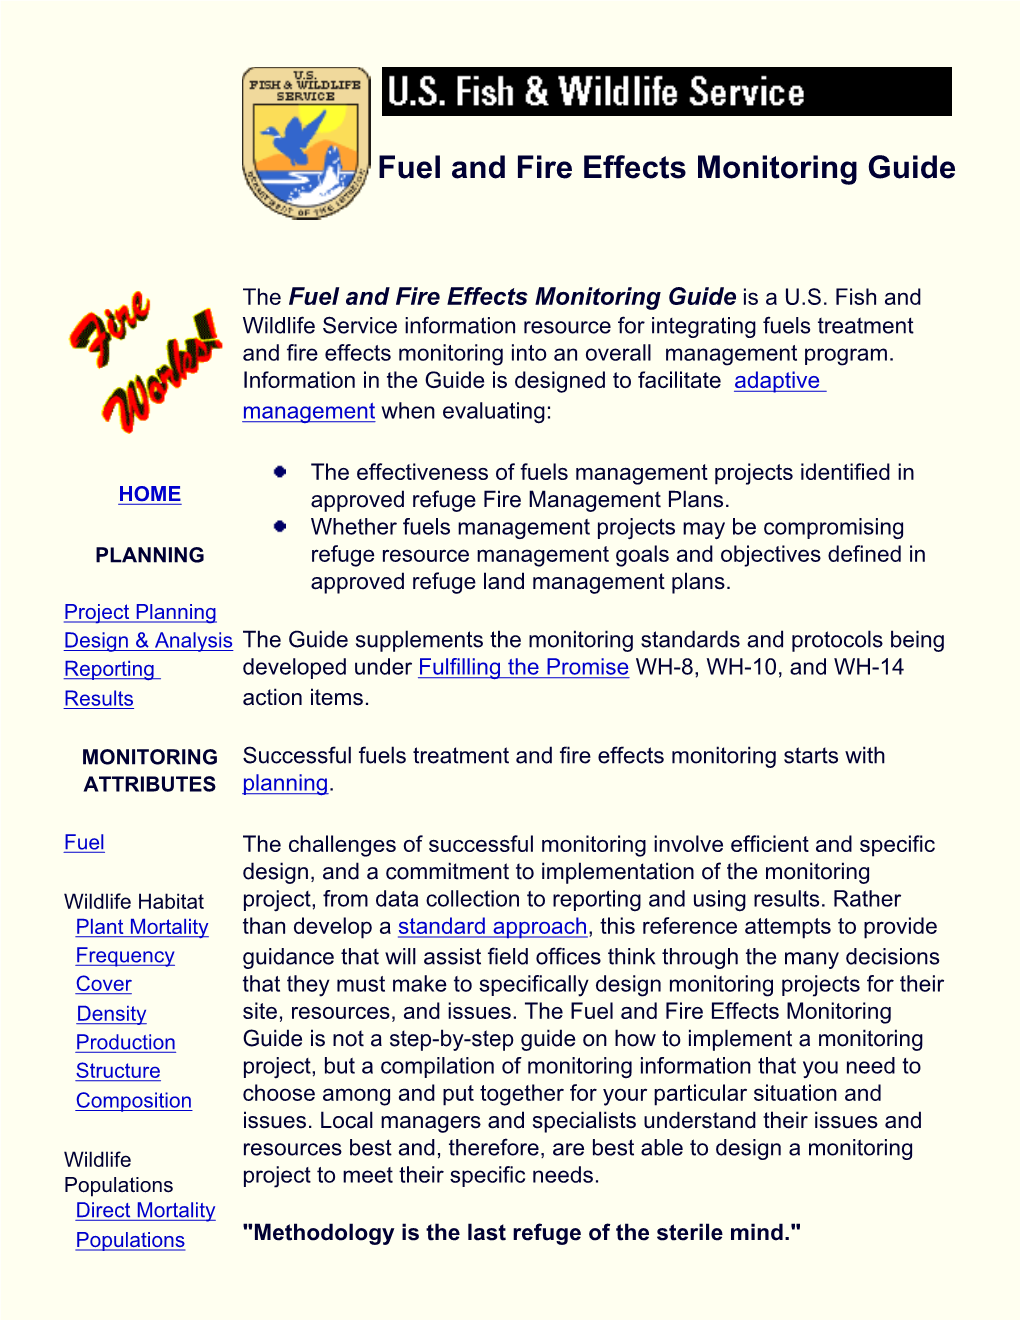 Fuel and Fire Effects Monitoring Guide